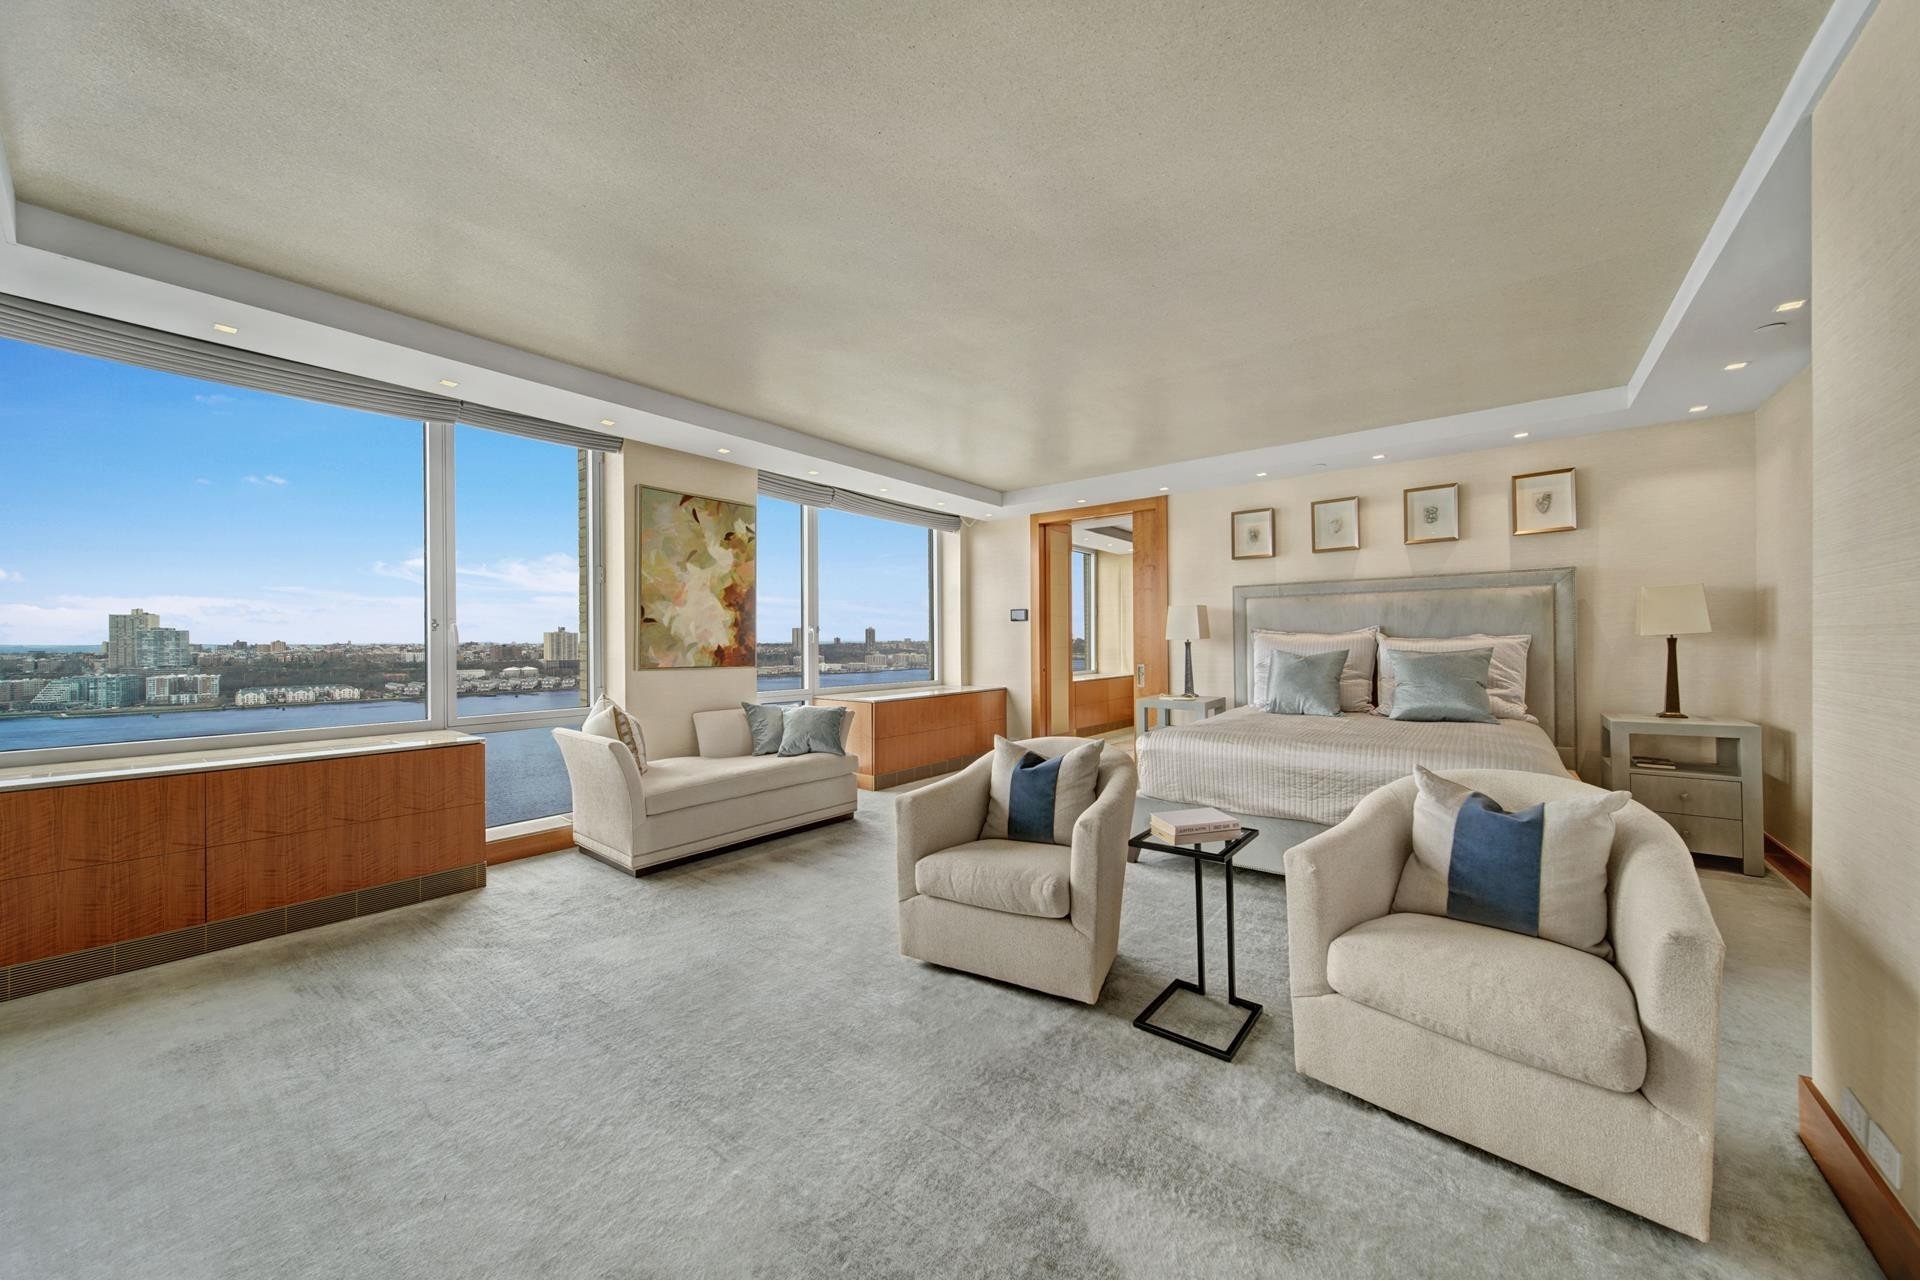 7. Condominiums for Sale at The Avery, 100 RIVERSIDE BLVD, 26THFLOOR Lincoln Square, New York, NY 10069